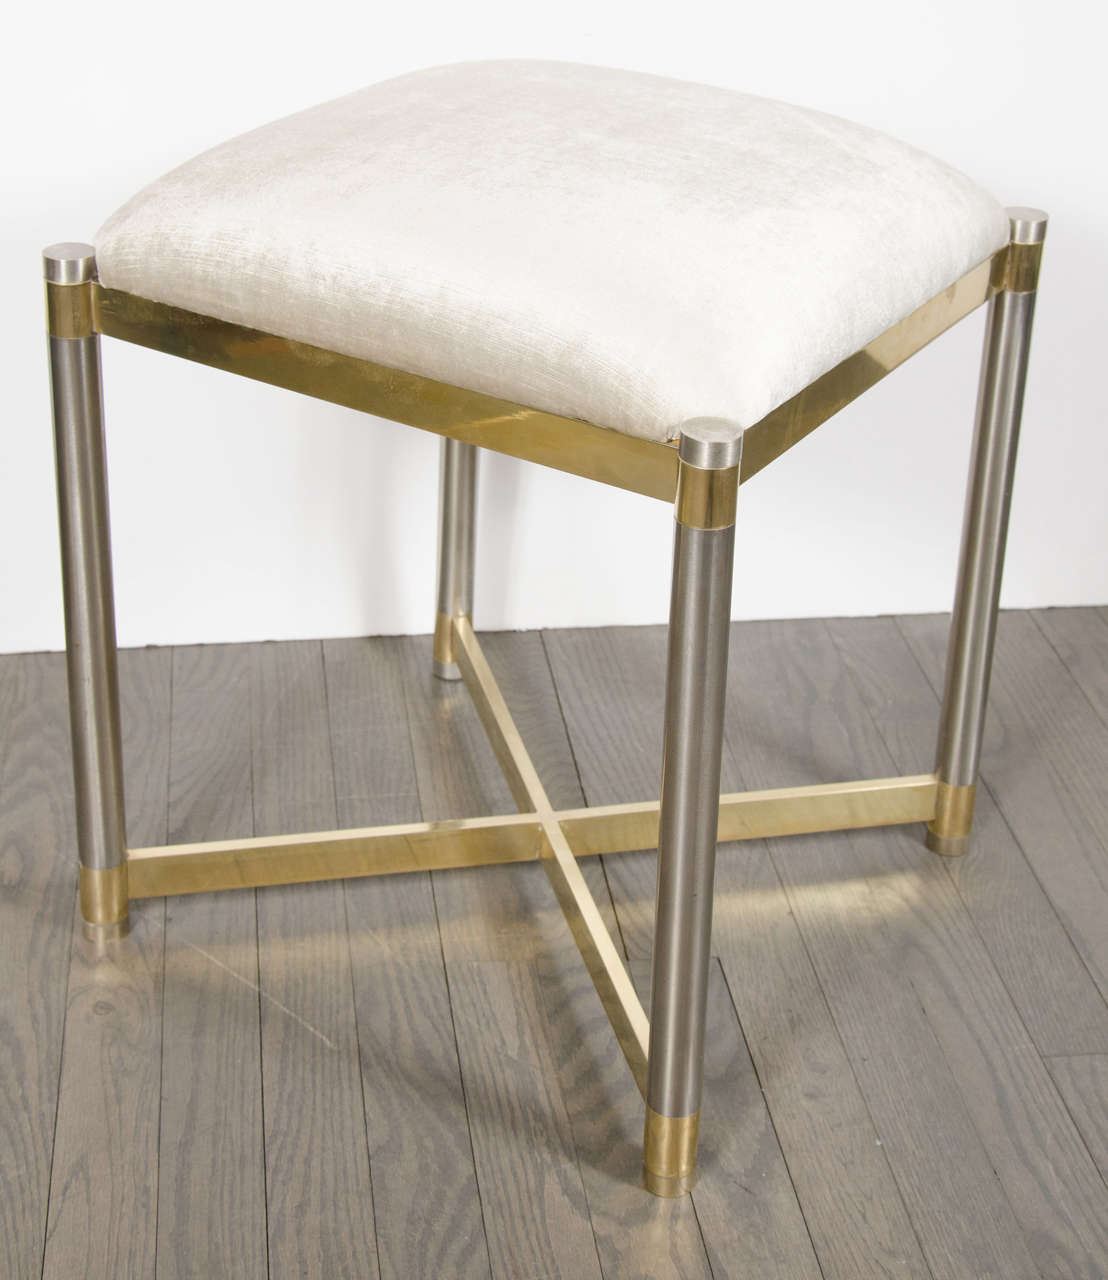 This sophisticated Mid-Century Modernist X-form stool in the manner of Karl Springer was realized in the United States, circa 1970. It features brushed cylindrical chrome legs banded in brass with a brass X-form support at its base and a rectangular